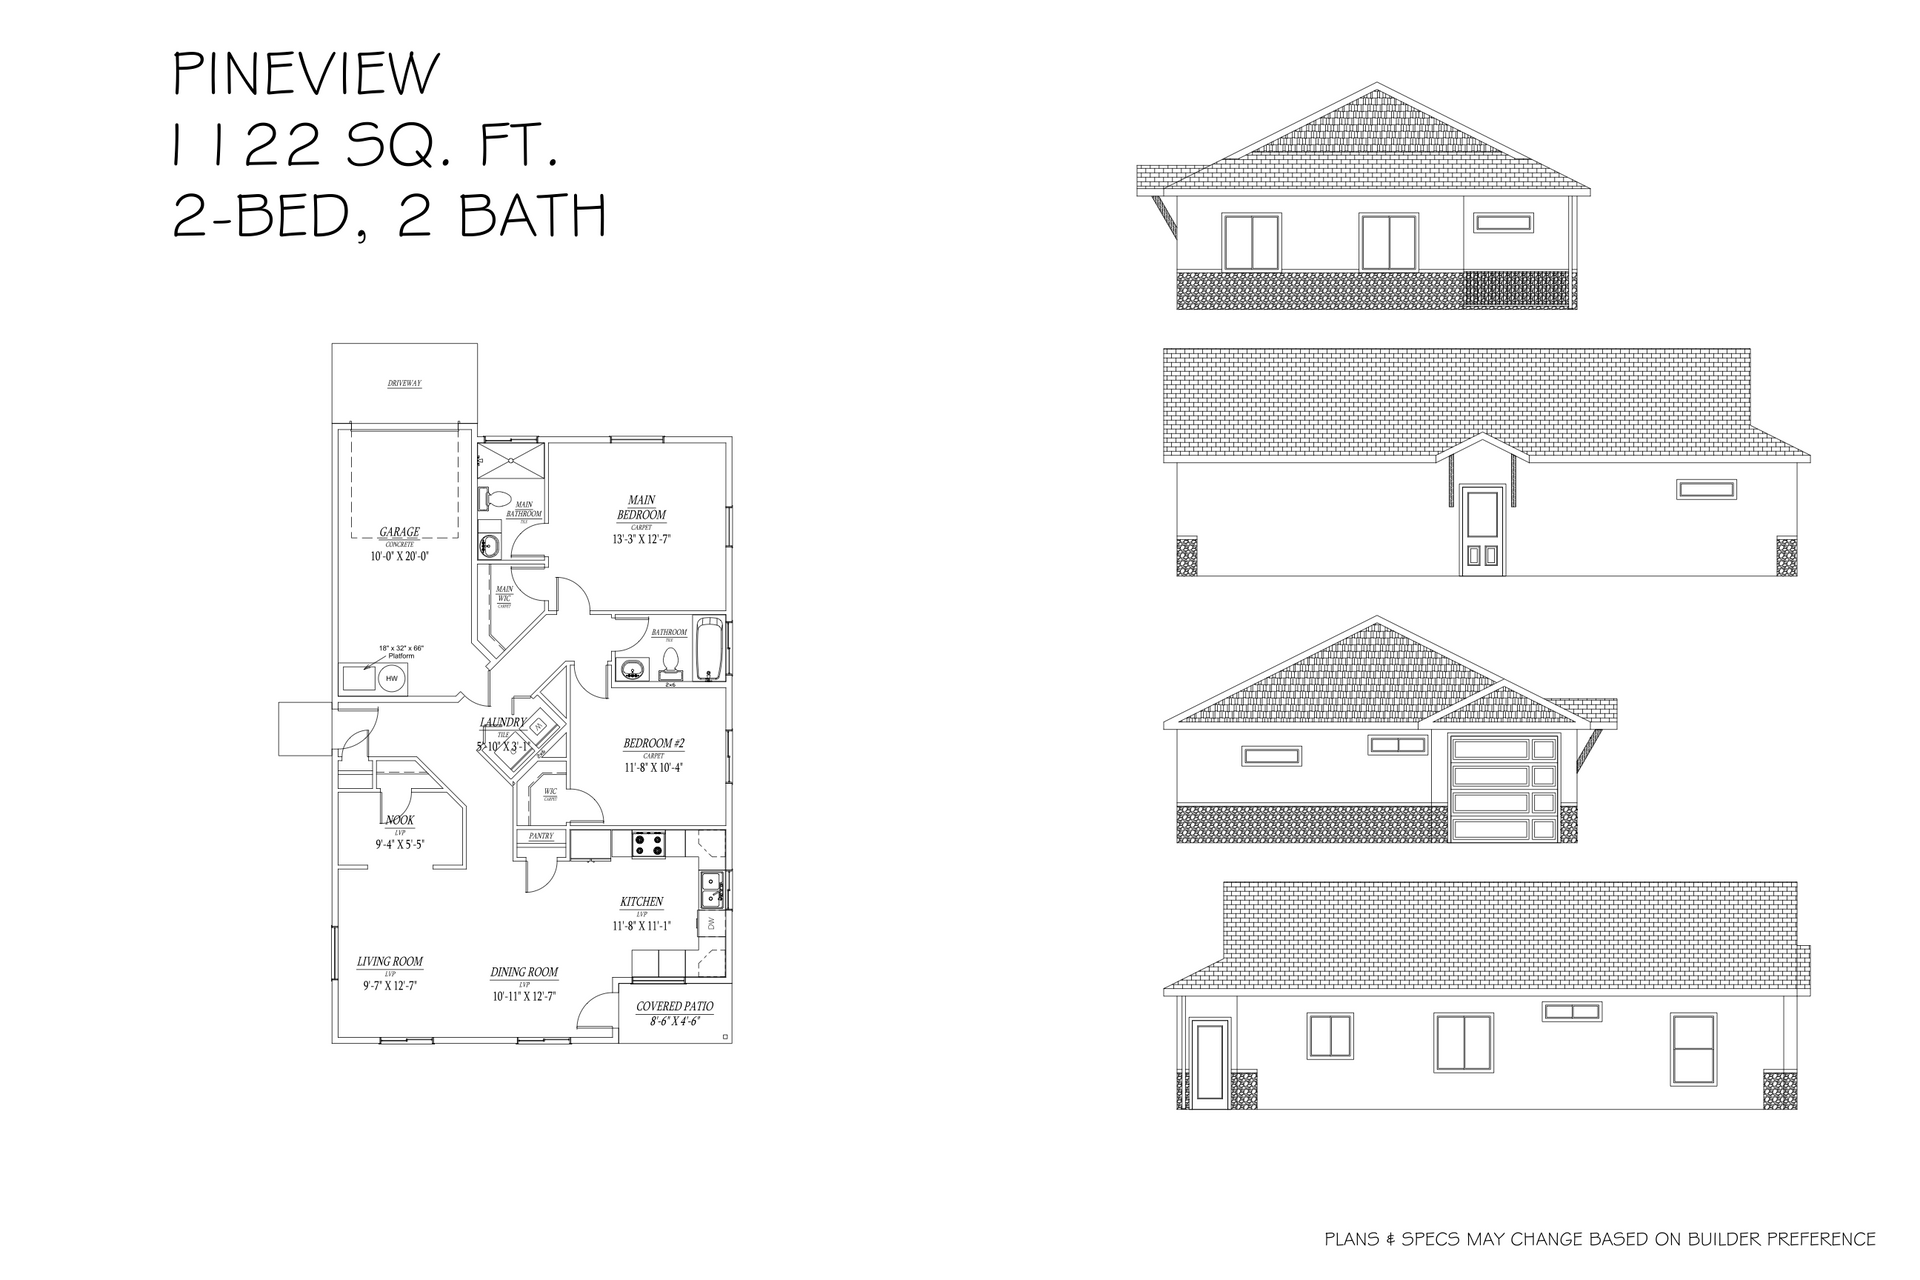 A black and white floor plan of a house with two bedrooms and two bathrooms.